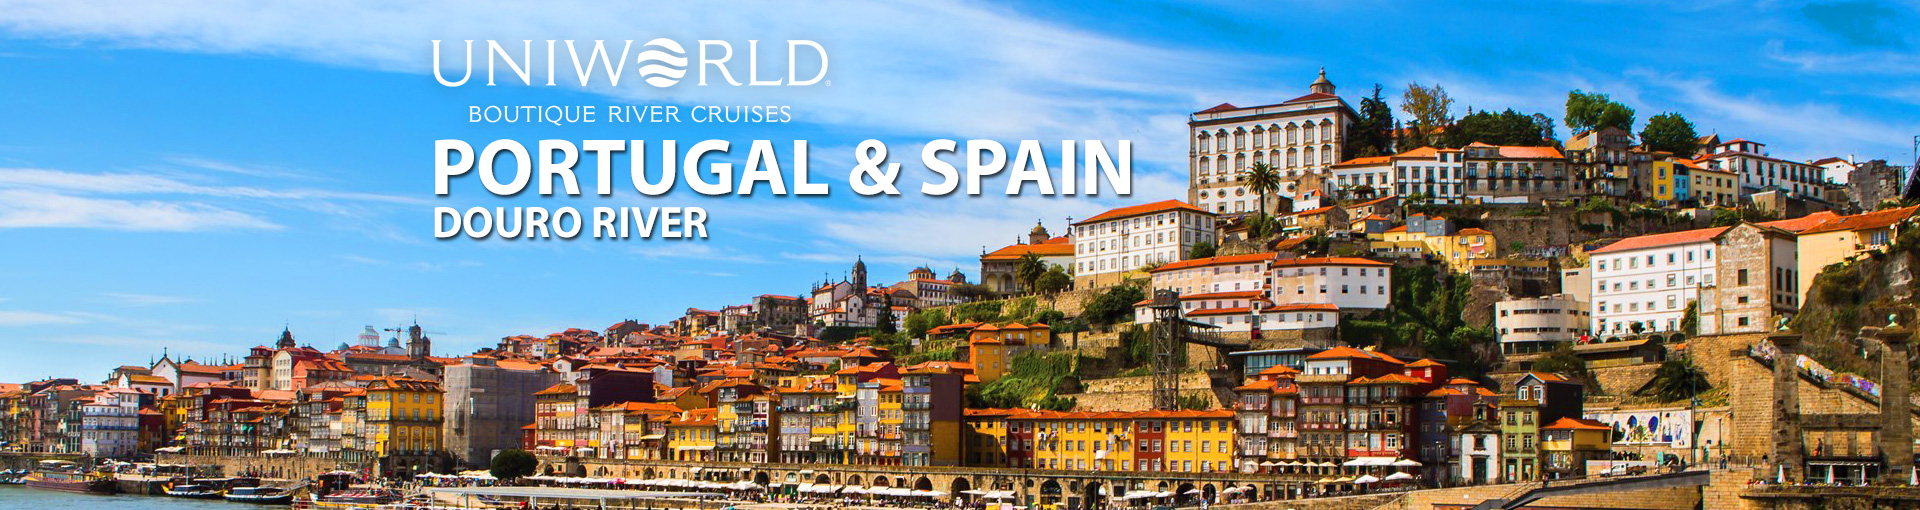 Uniworld River Cruises to Portugal and Spain